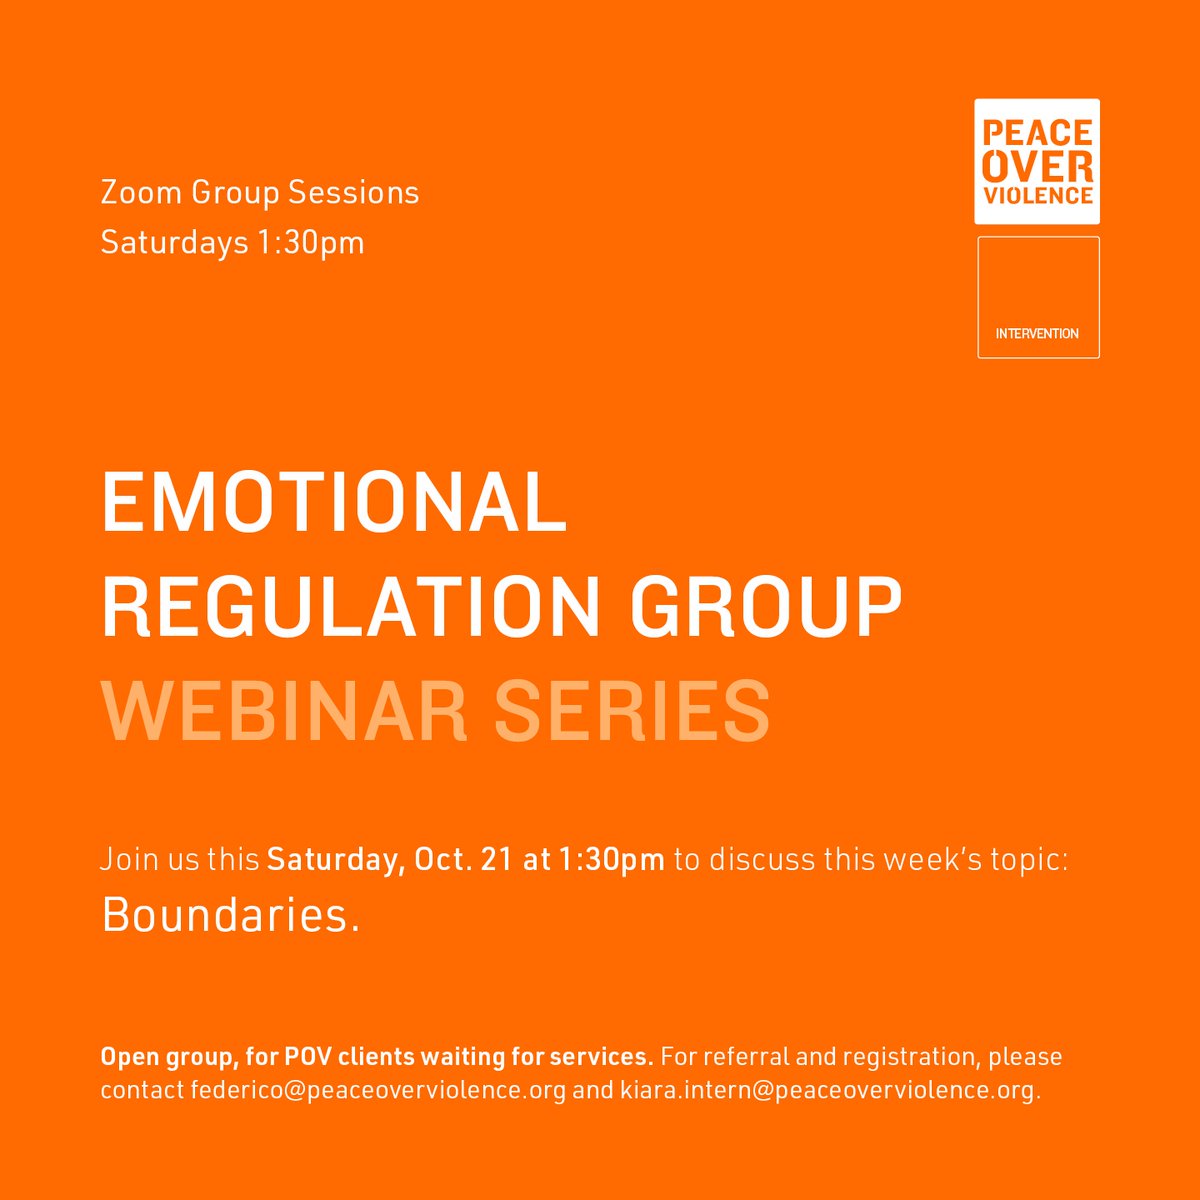 Time to talk about #boundaries! Existing POV clients! Join our virtual Emotional Regulation Group THIS Saturday, Oct. 21 at 1:30 p.m. PT to discuss how to #SetBoundaries to strengthen personal #wellbeing, #relationships, #MentalHealth + more! Email Federico@PeaceOverViolence.org